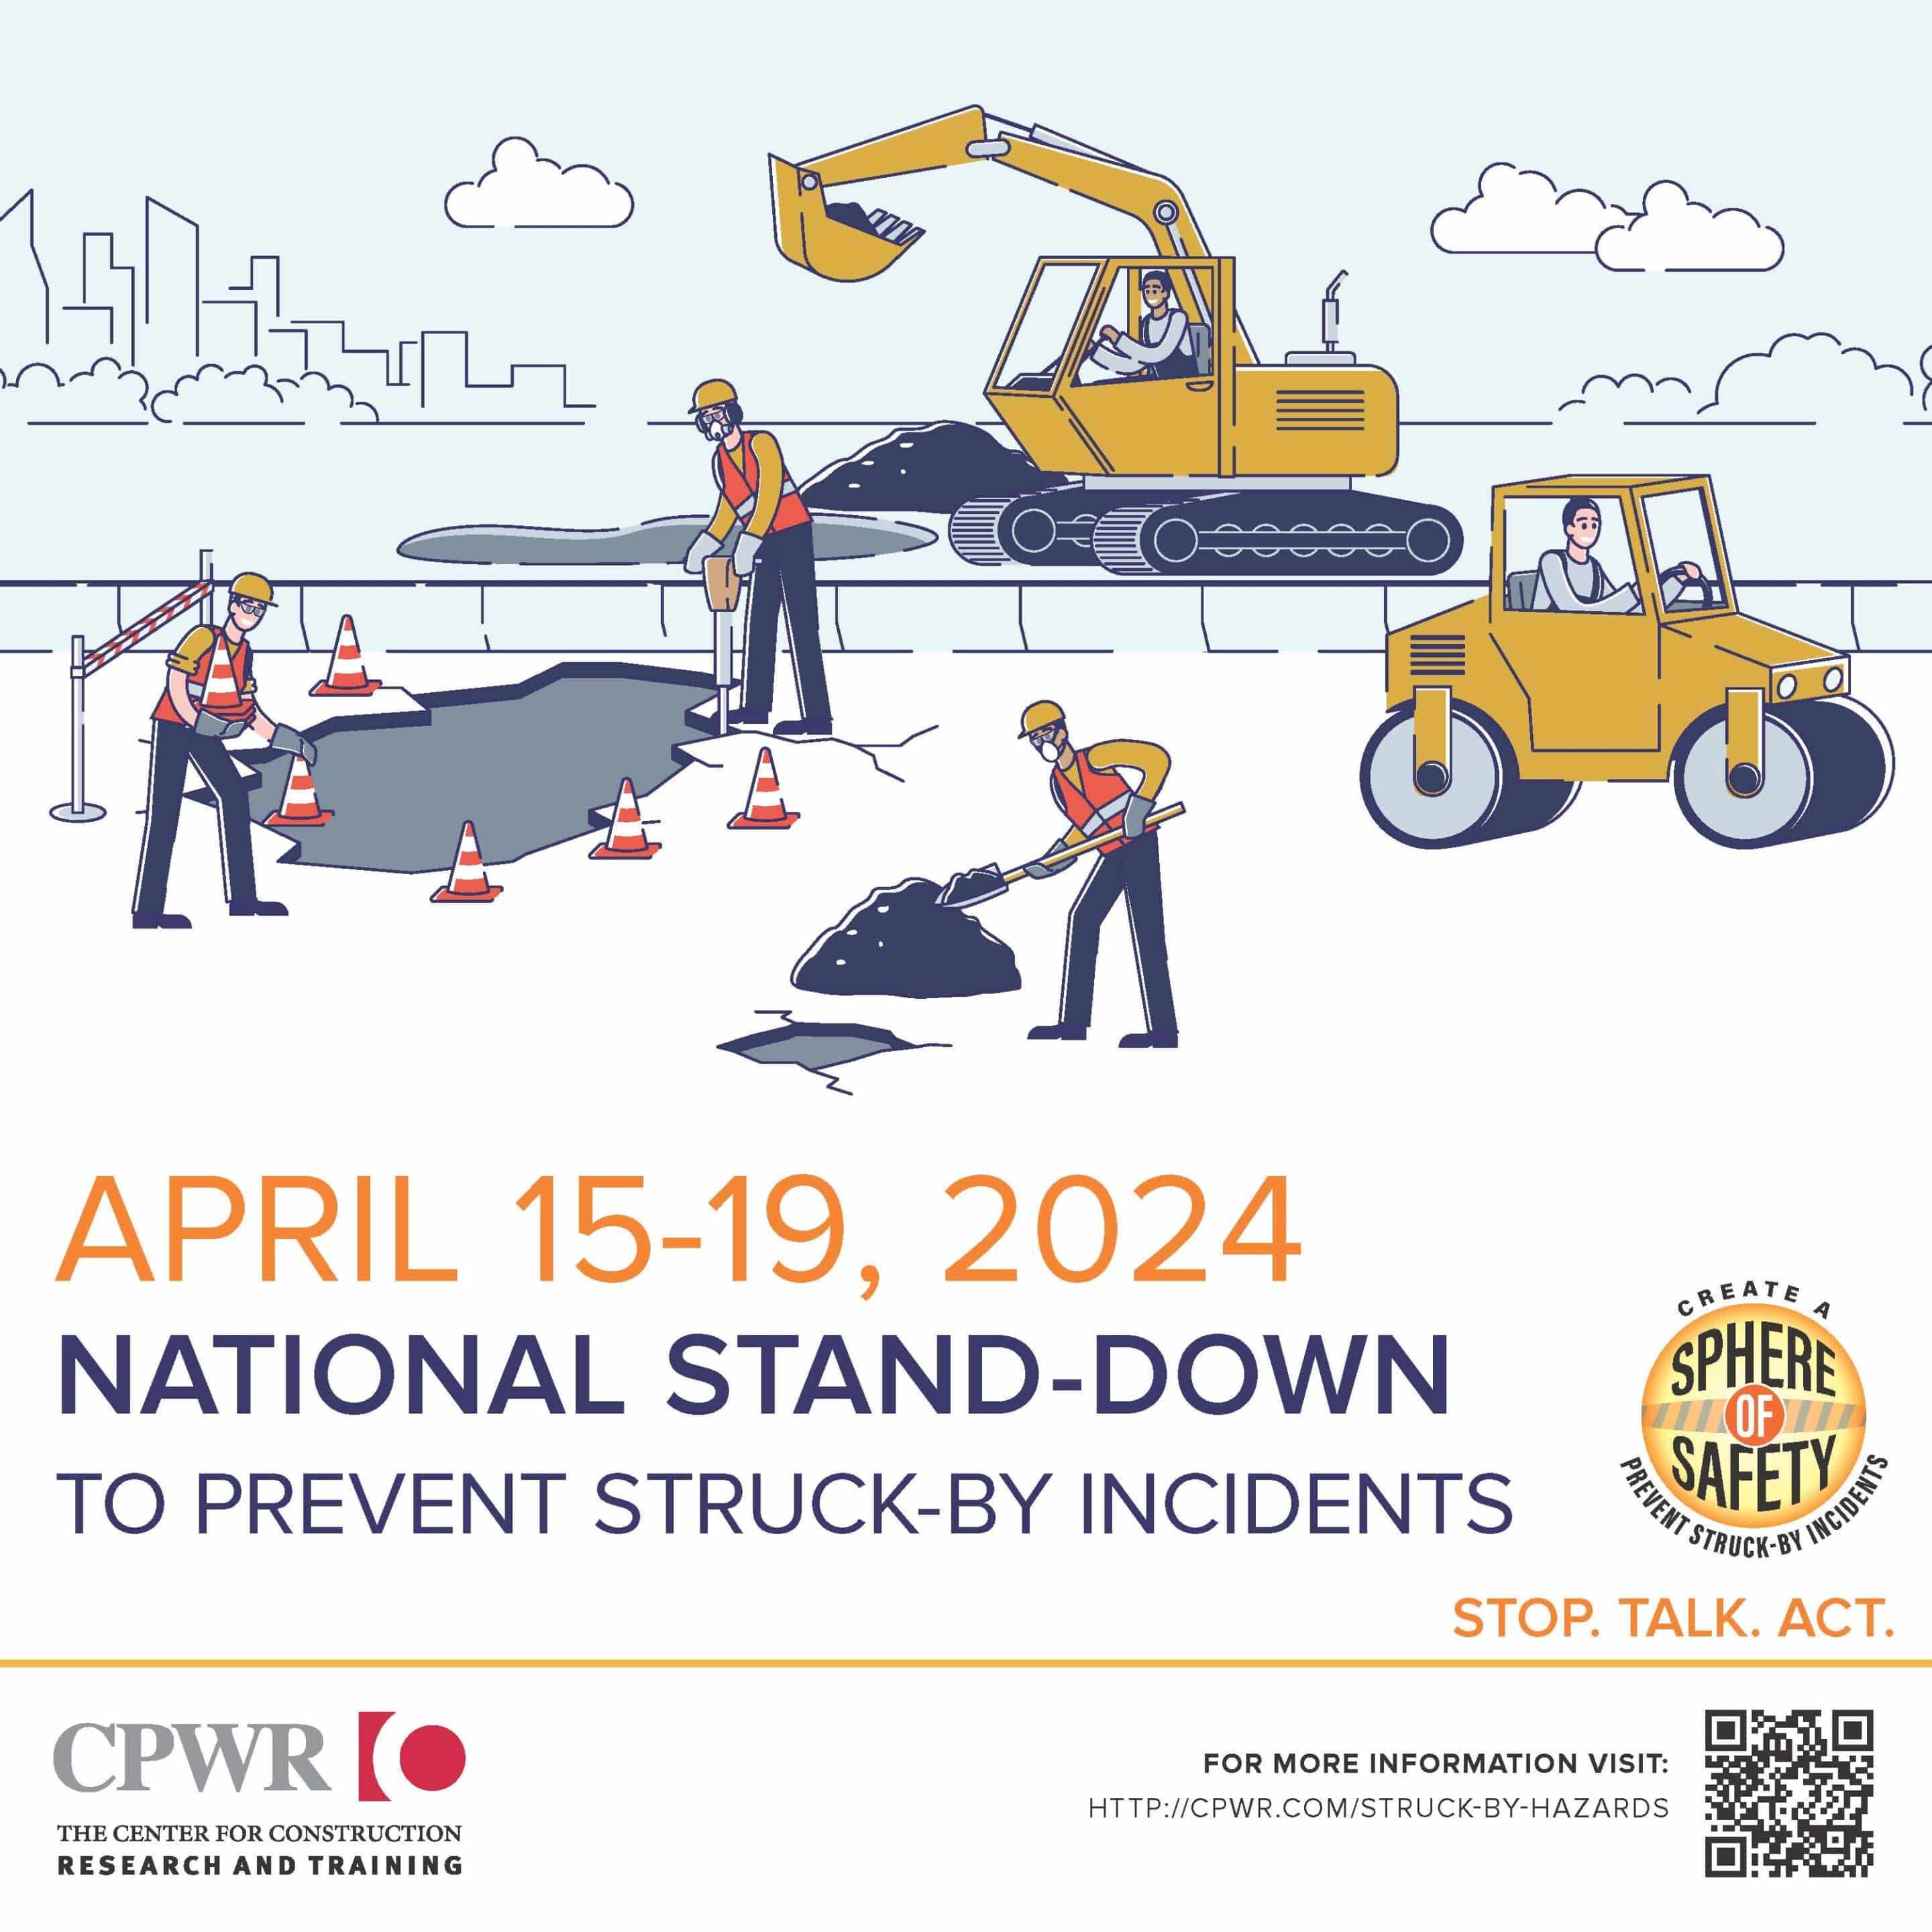 National Stand-Down to Prevent Struck-By Incidents graphic